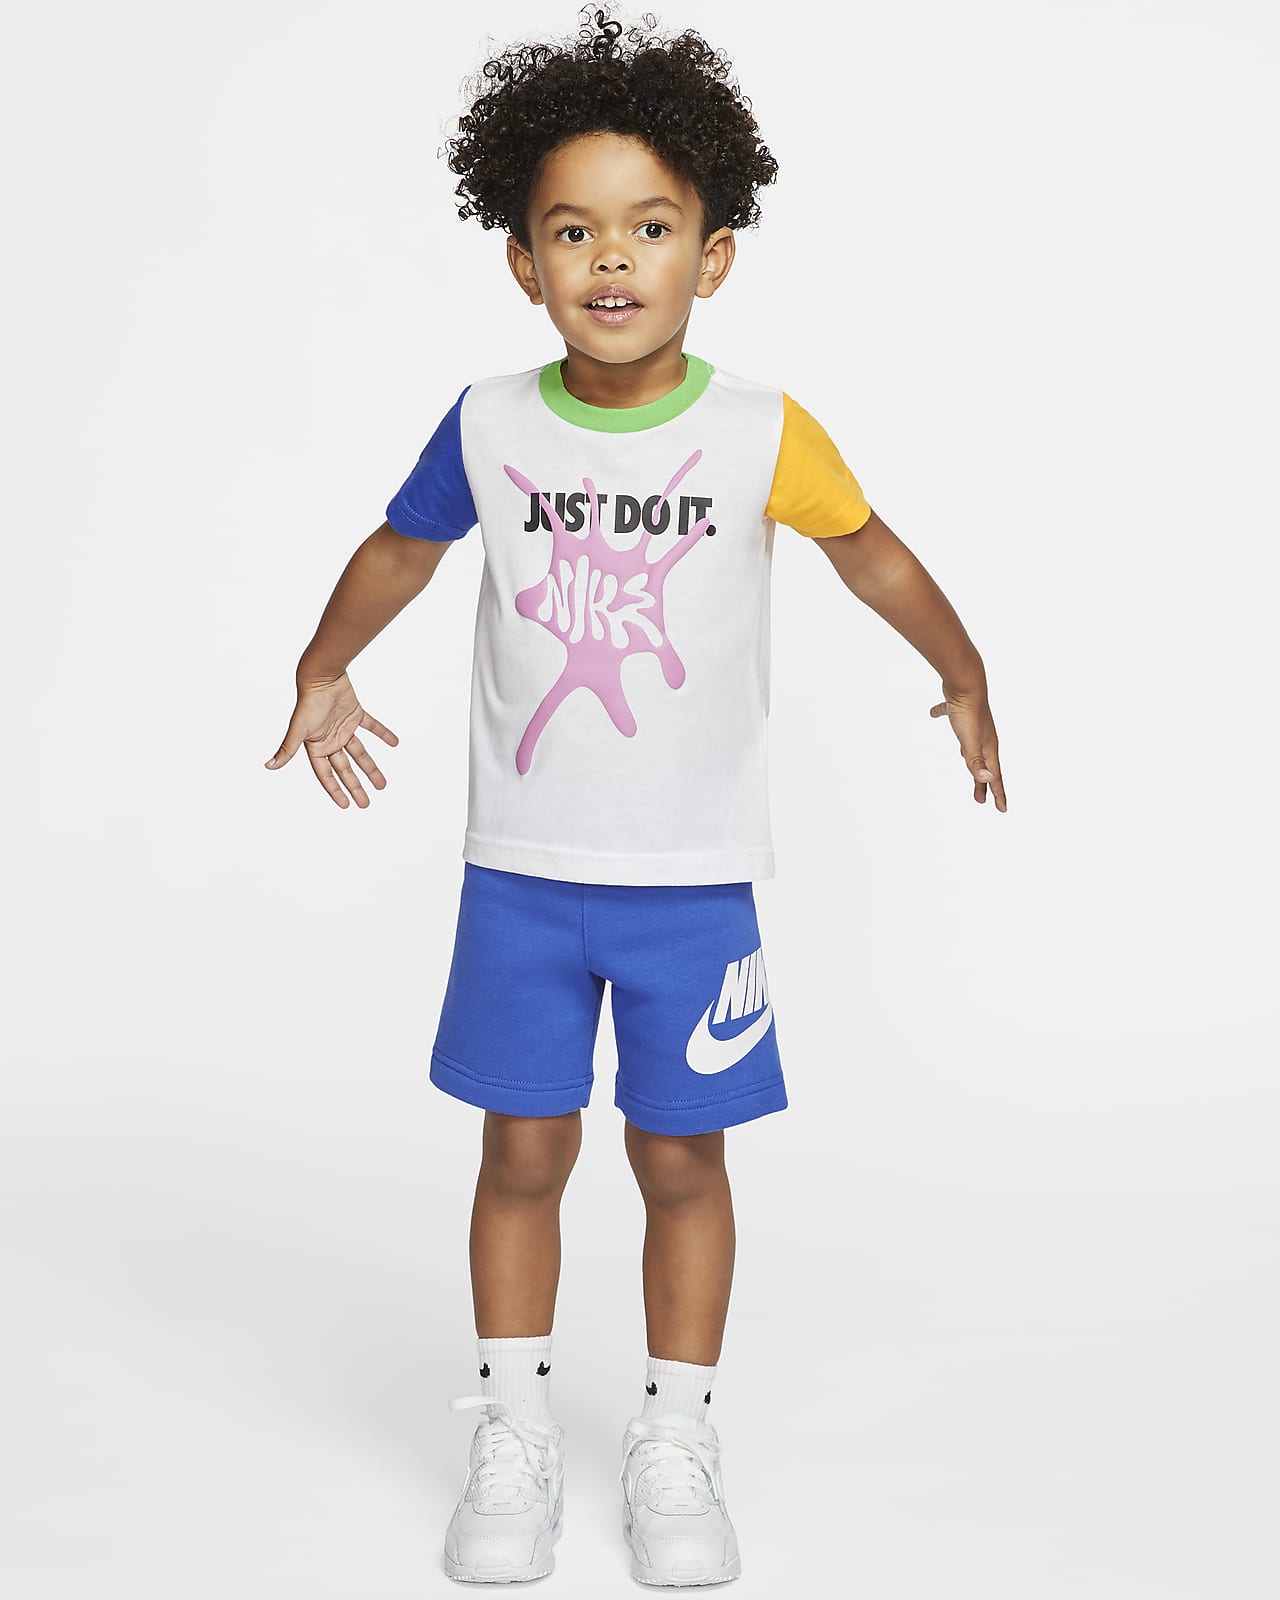 nike toddler clothes